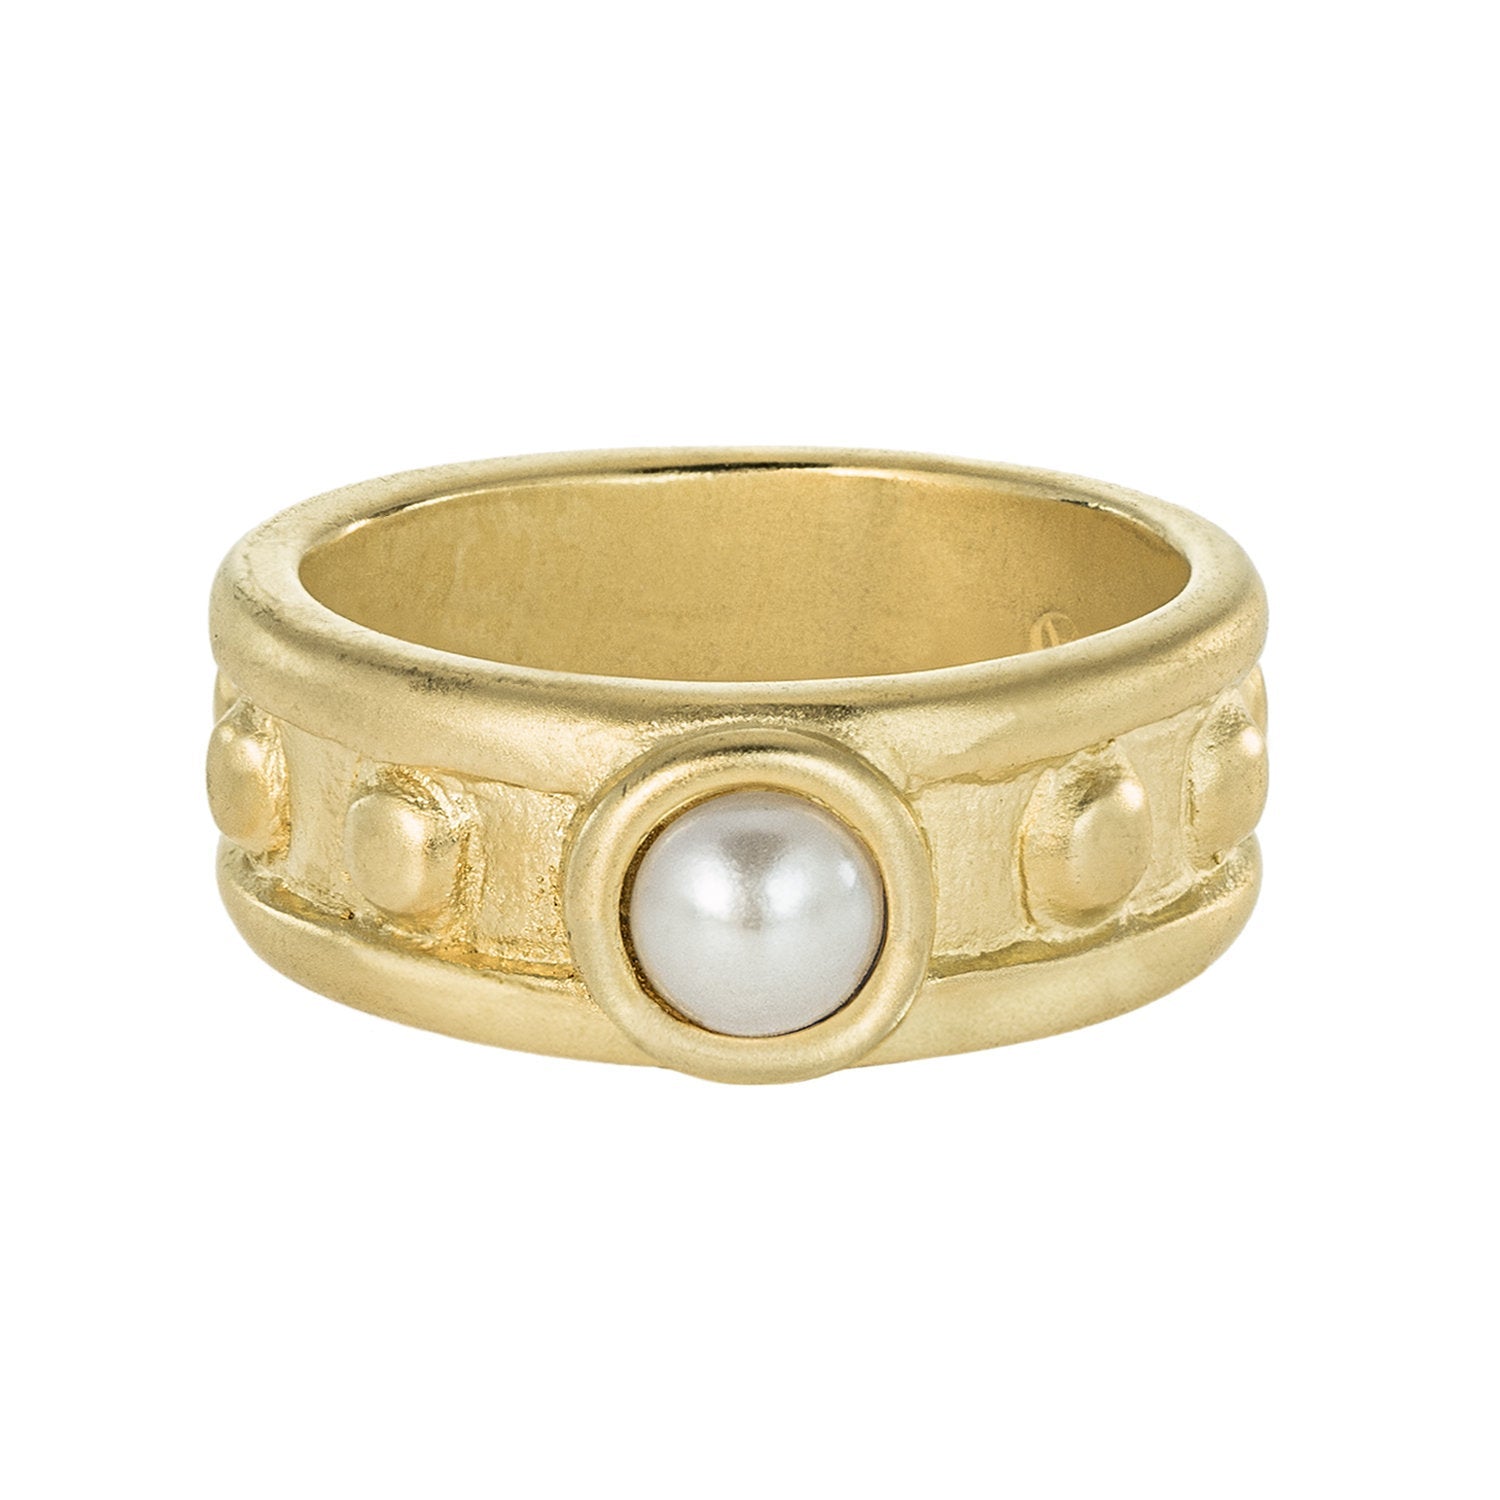 vintage-glass-pearl-ring-brushed-yellow-gold-plated